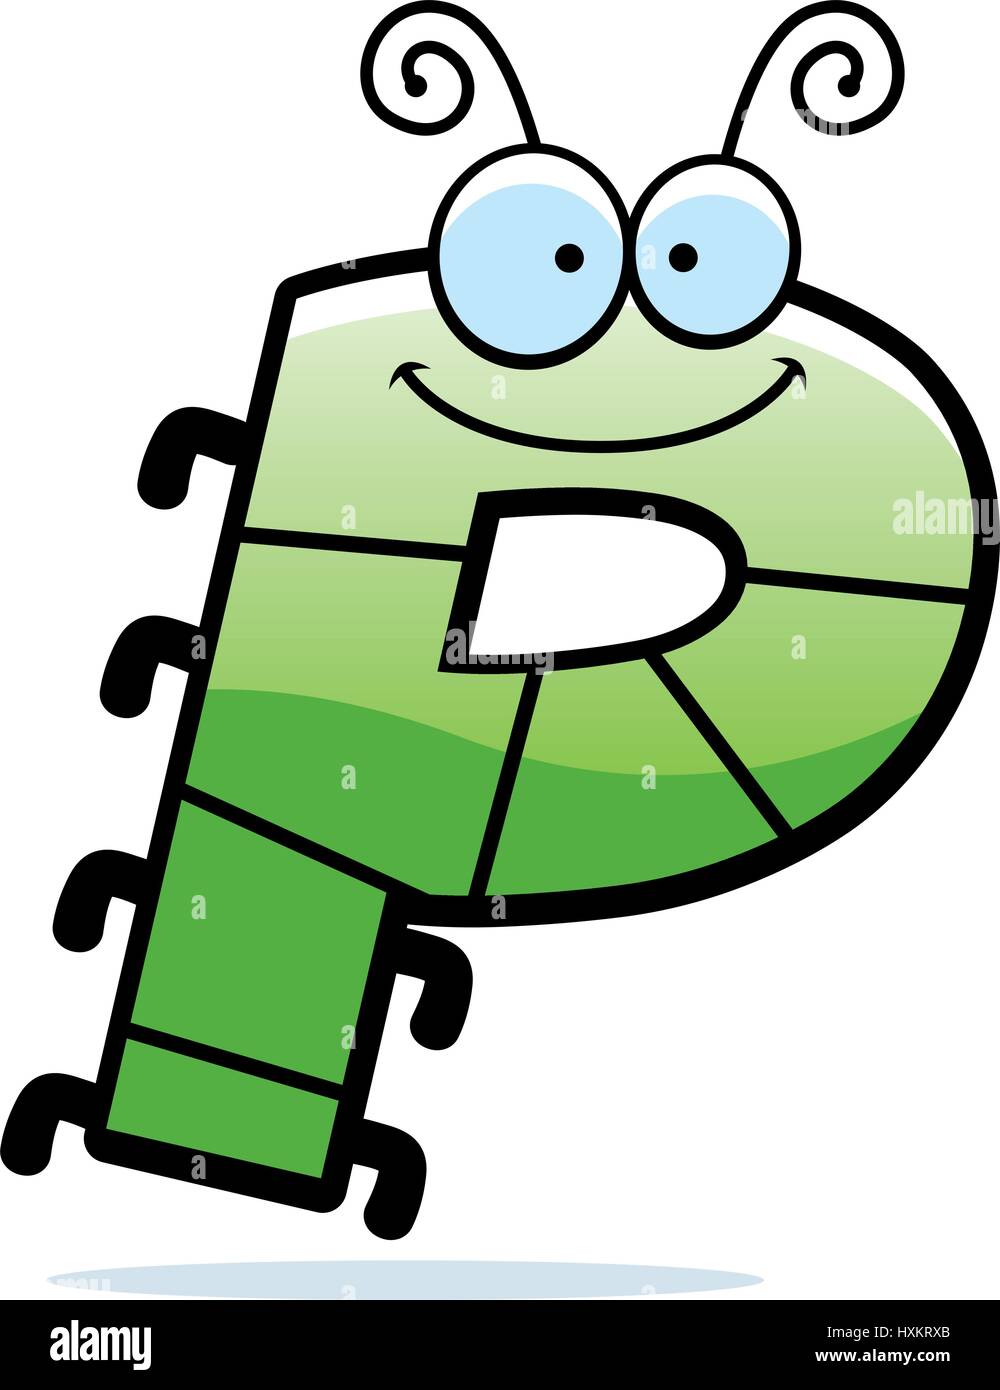 A cartoon illustration of the letter P with an insect theme. Stock Vector